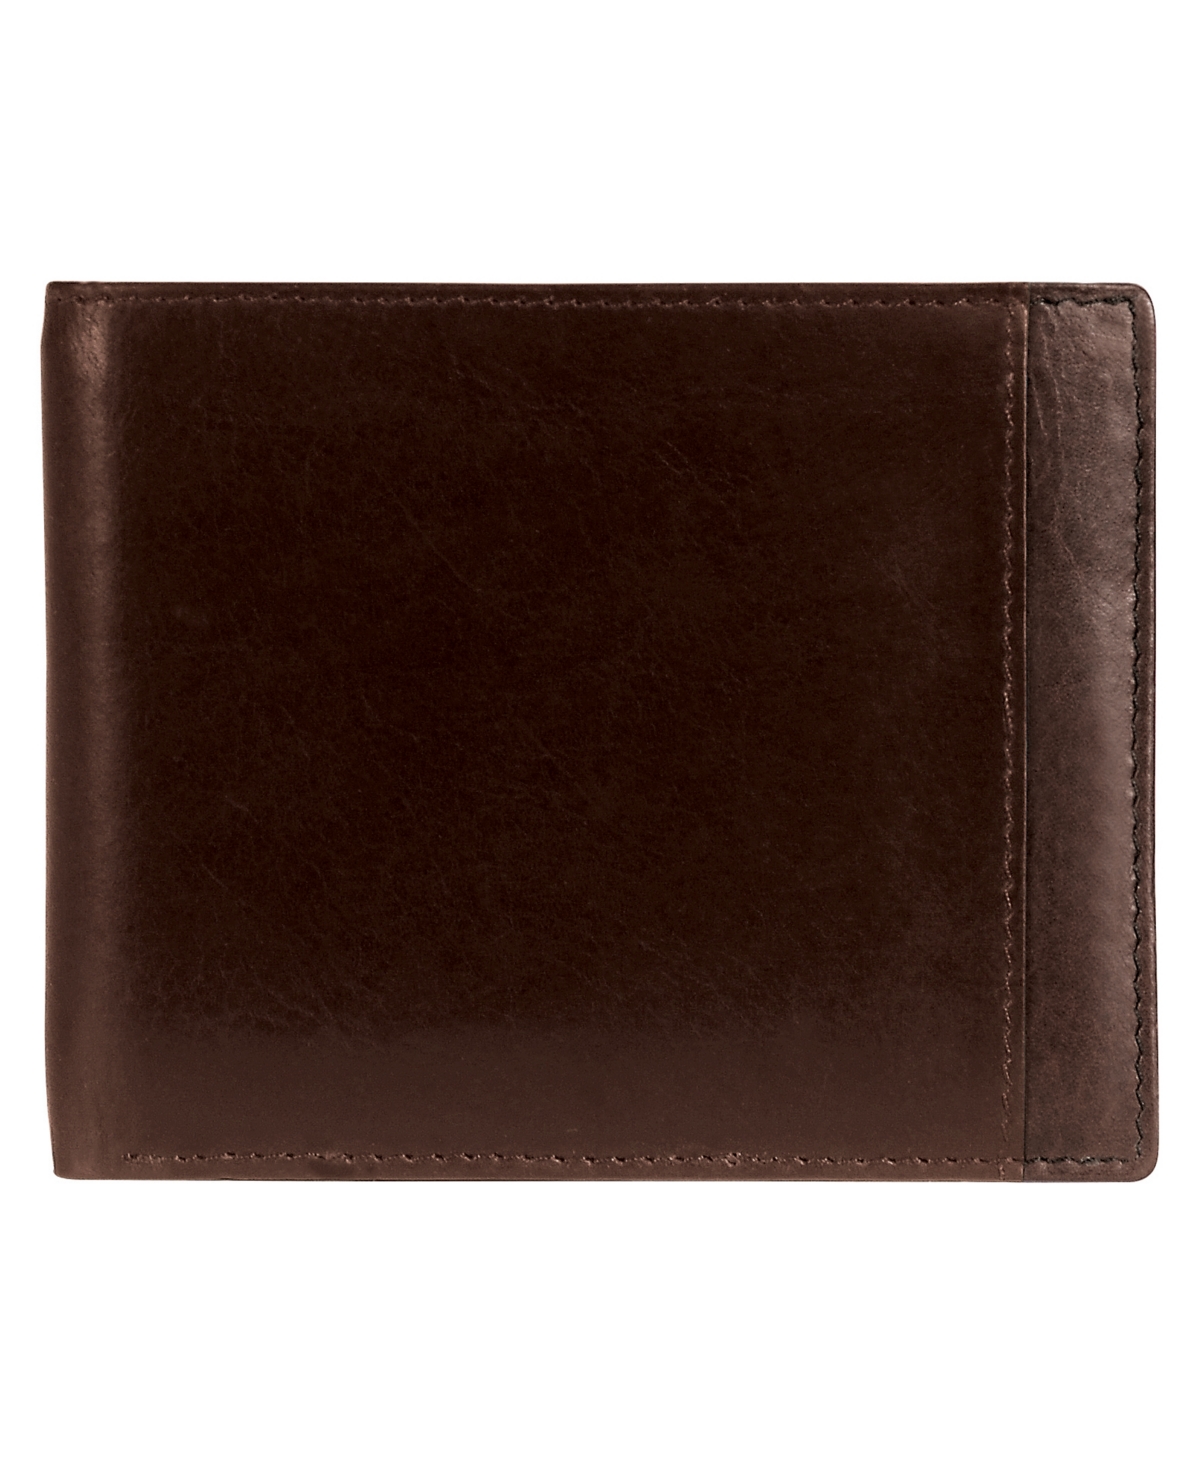 Casablanca Collection Men's Rfid Secure Center Billfold with Removable Center Wing Passcase - Black